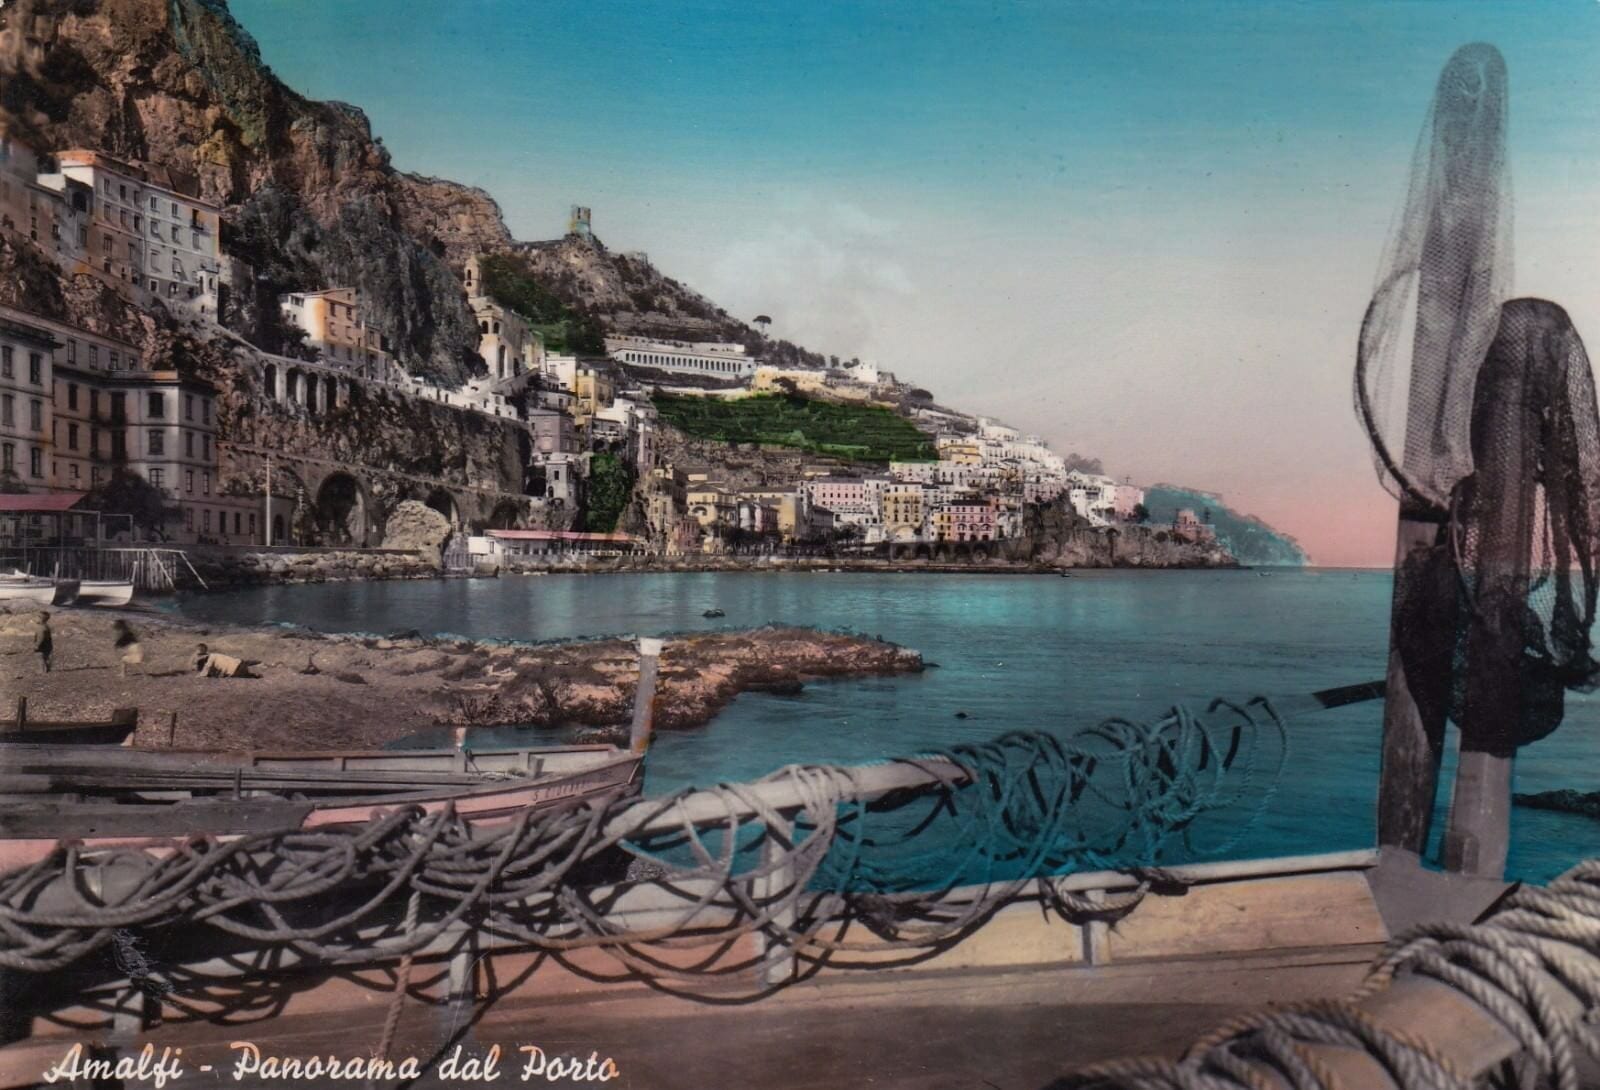 Panorama of the port of Amalfi, as it was in 1957. Now you could find this place. It’s Ristorante Lo Smeraldino. The beach hasn't changed a bit. It's just become full of chic luxury yachts.